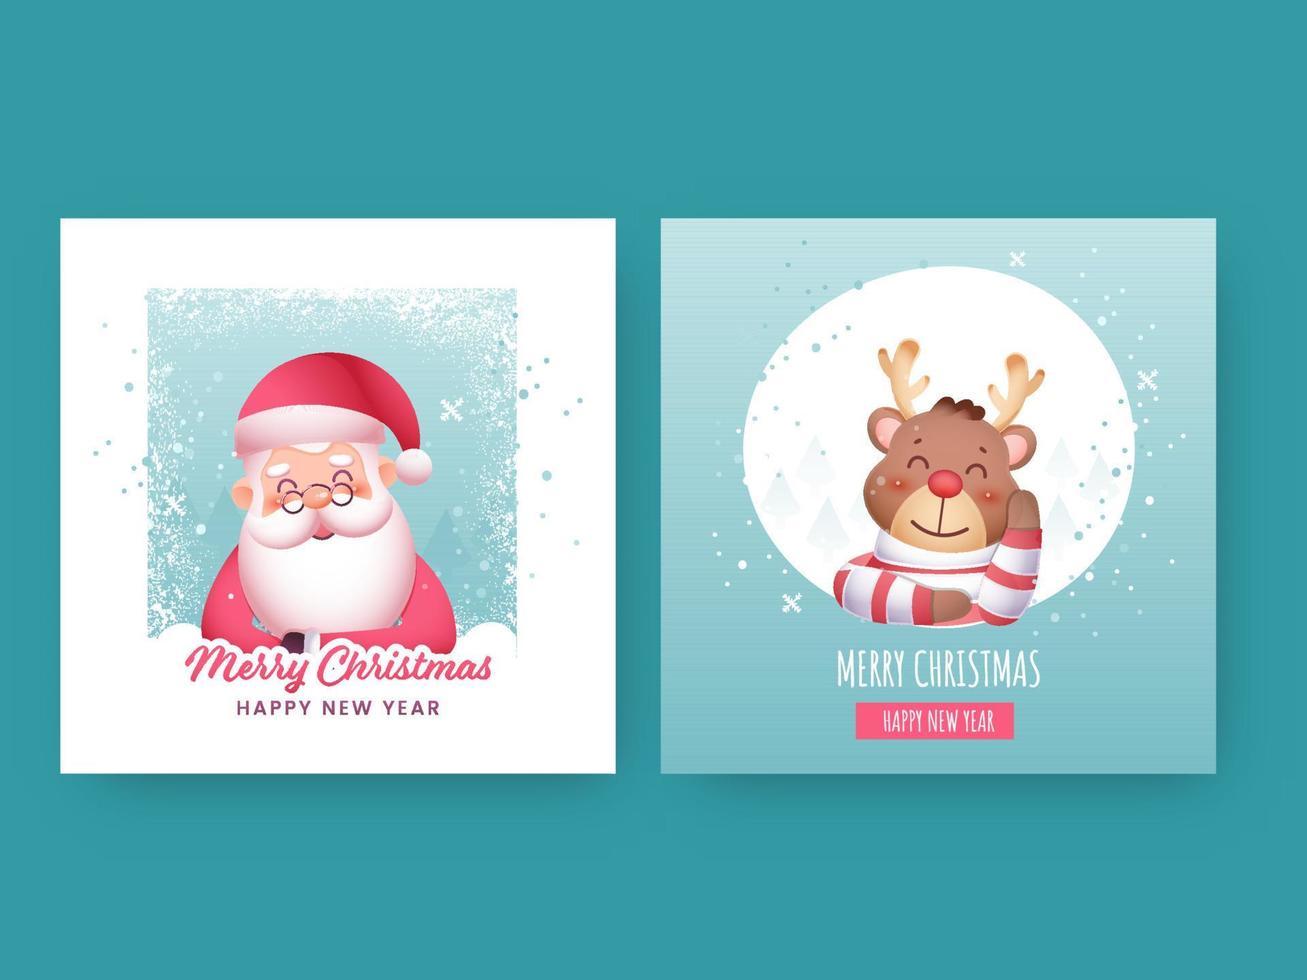 Two Color Options Of Merry Christmas Happy New Year Greeting Card With Cartoon Santa Claus, Reindeer Character. vector